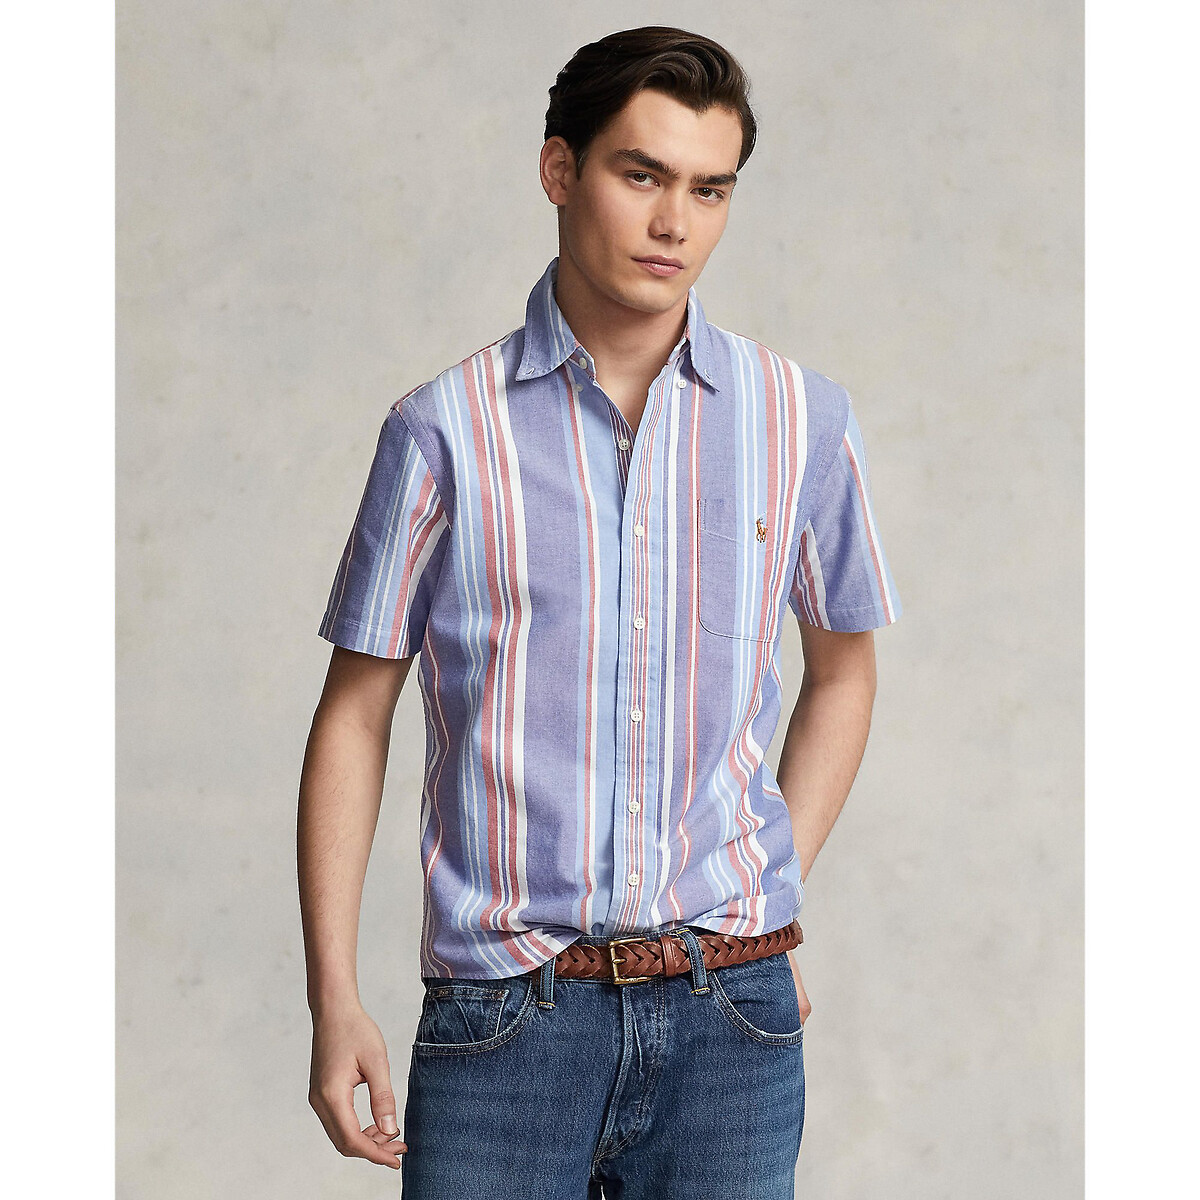 Image of Striped Oxford Cotton Shirt with Short Sleeves